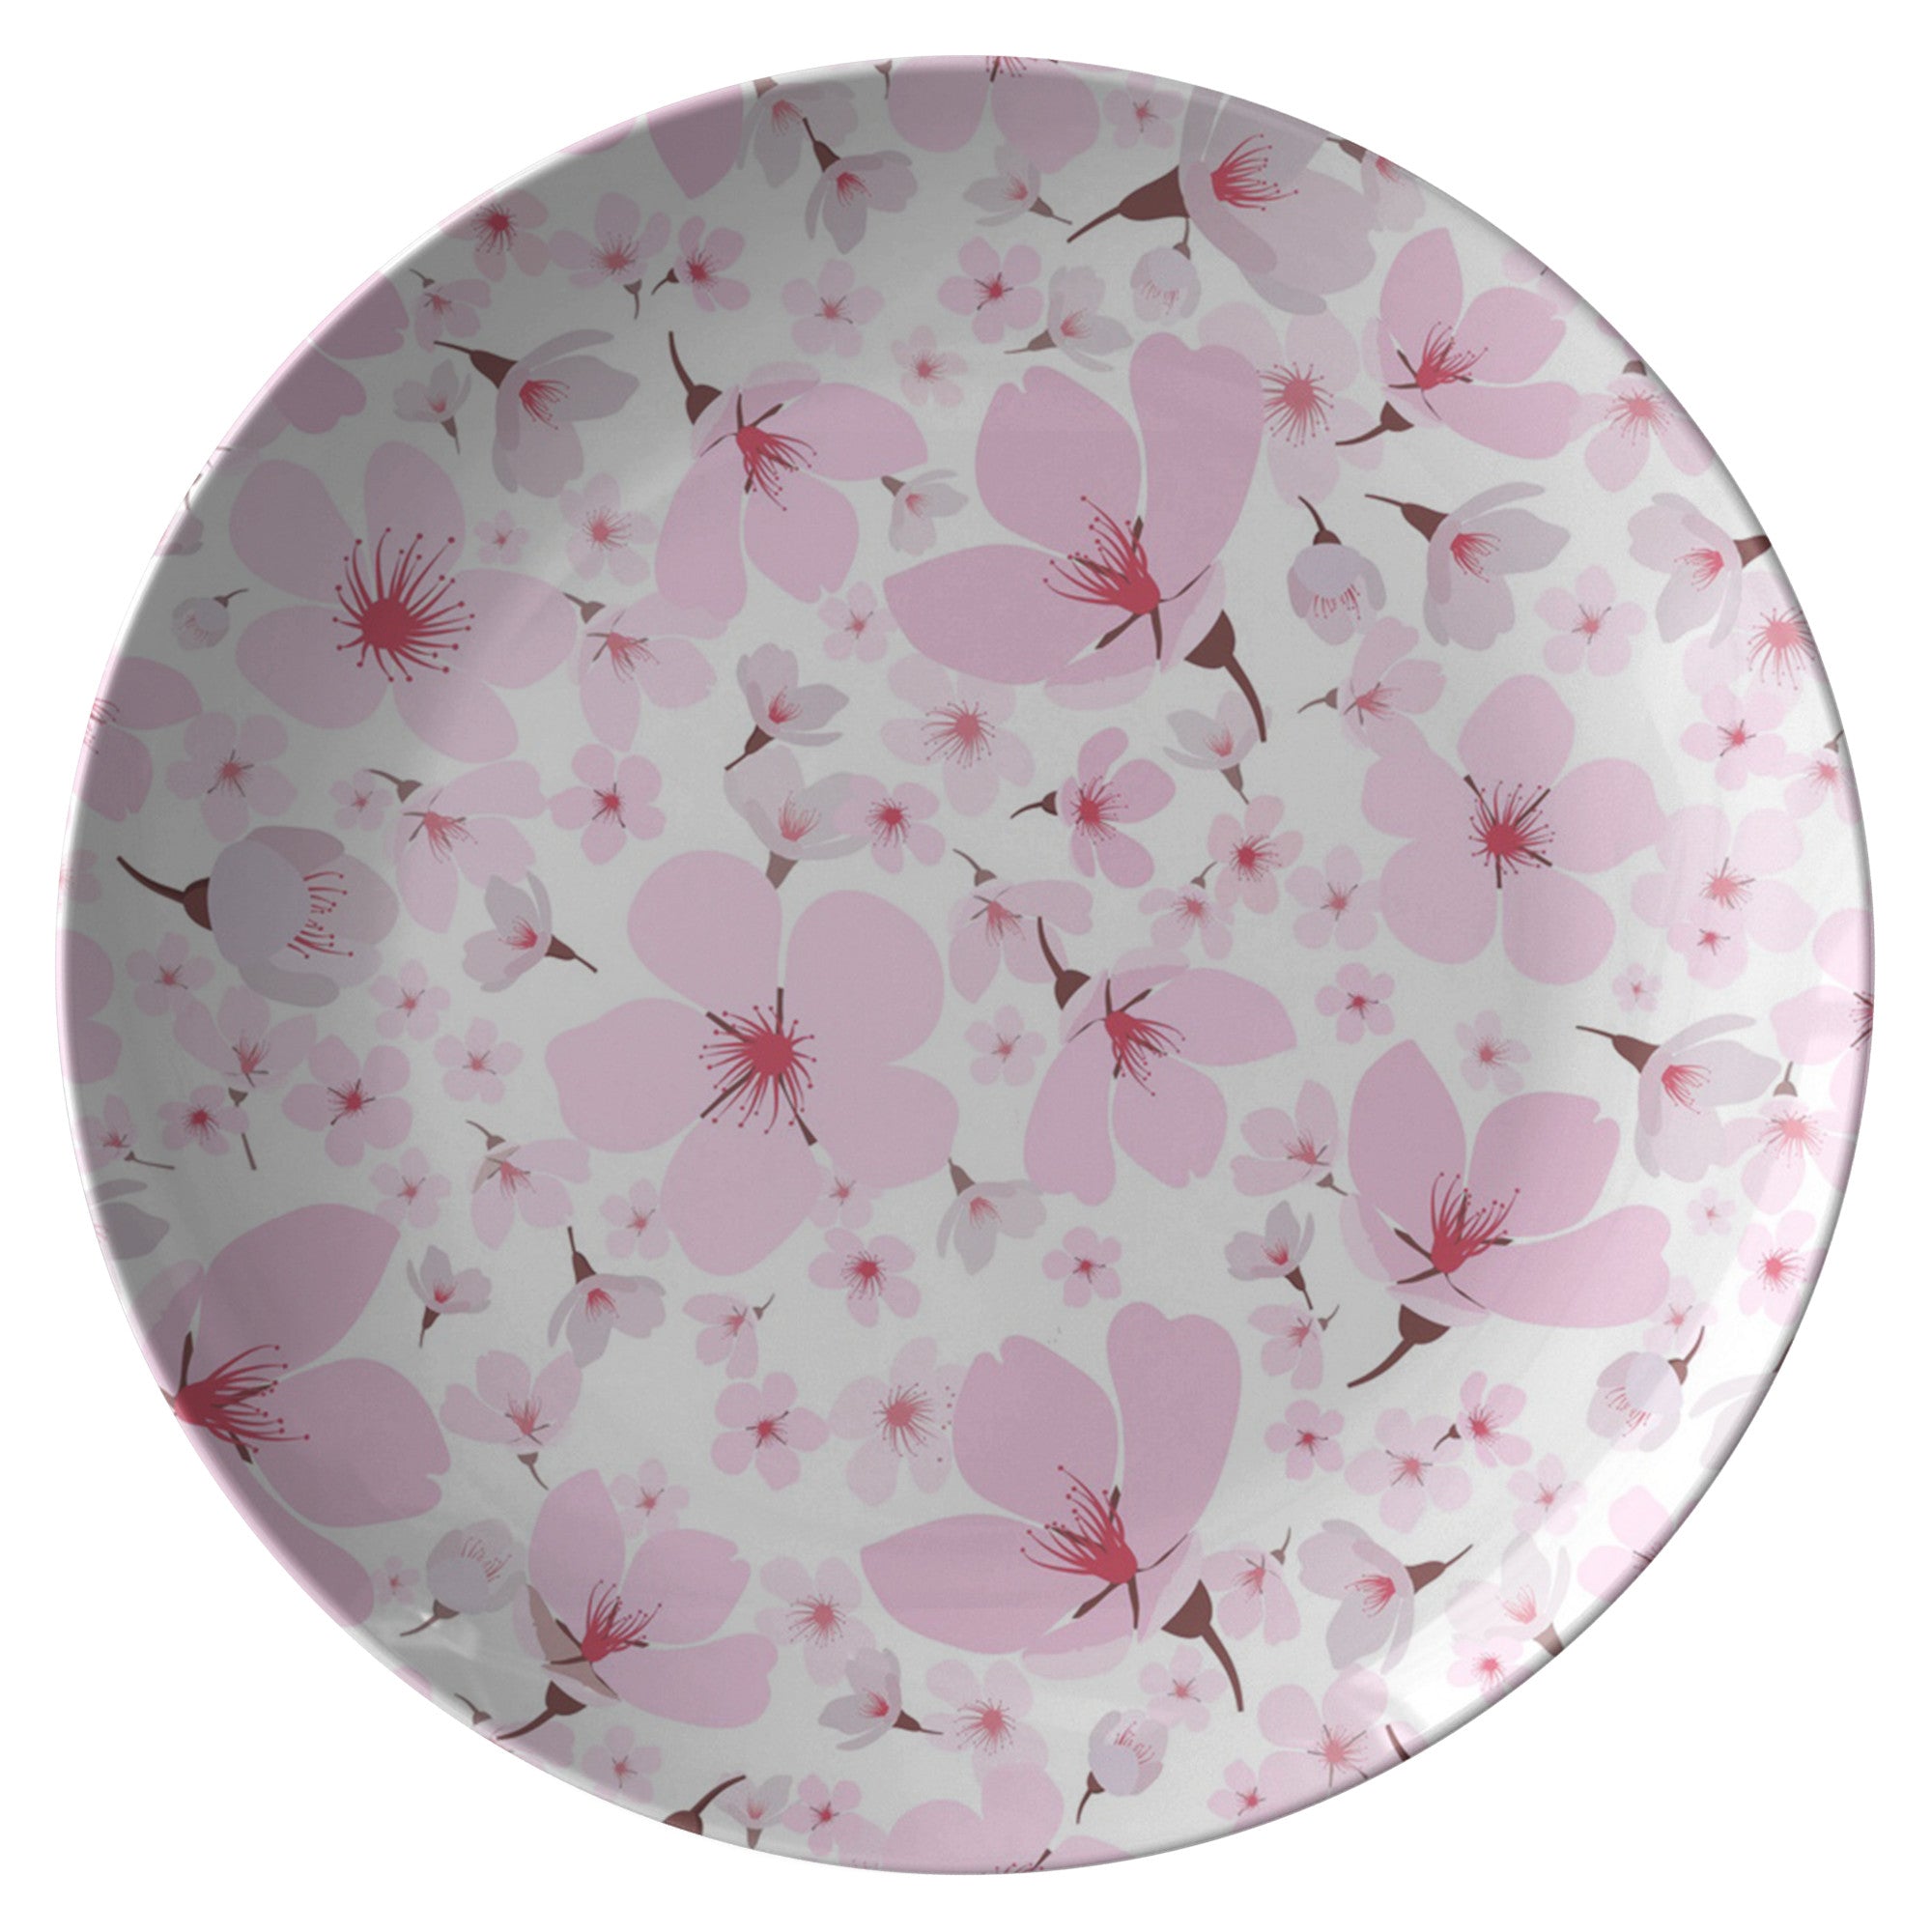 Printed Polymer Dinner Plate - Cherry Blossoms